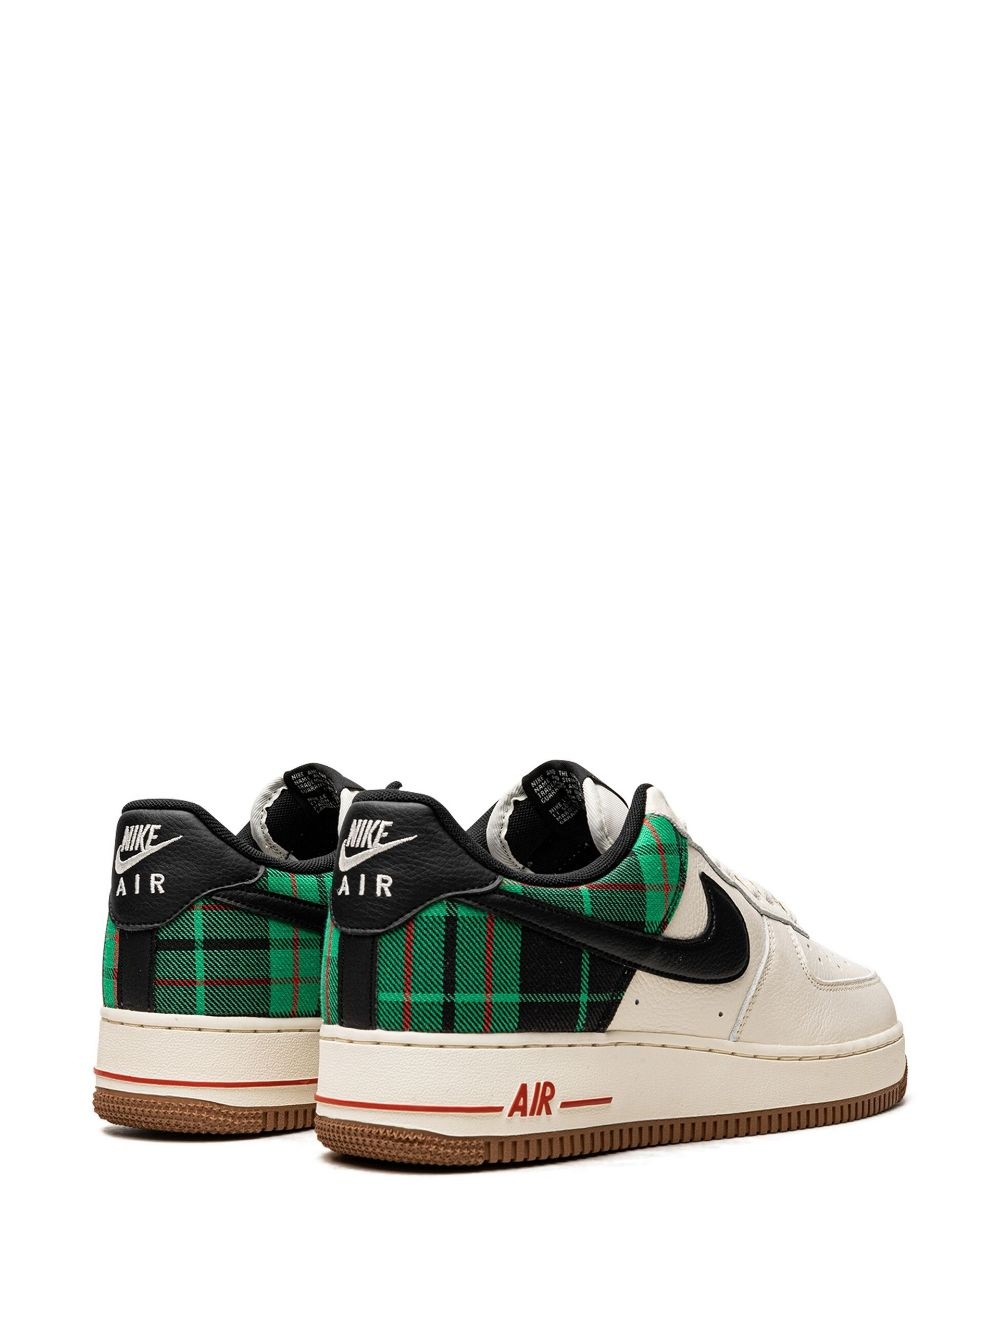 Air Force 1 Low '07 LX "Plaid Pale Ivory Stadium Green" sneakers - 3